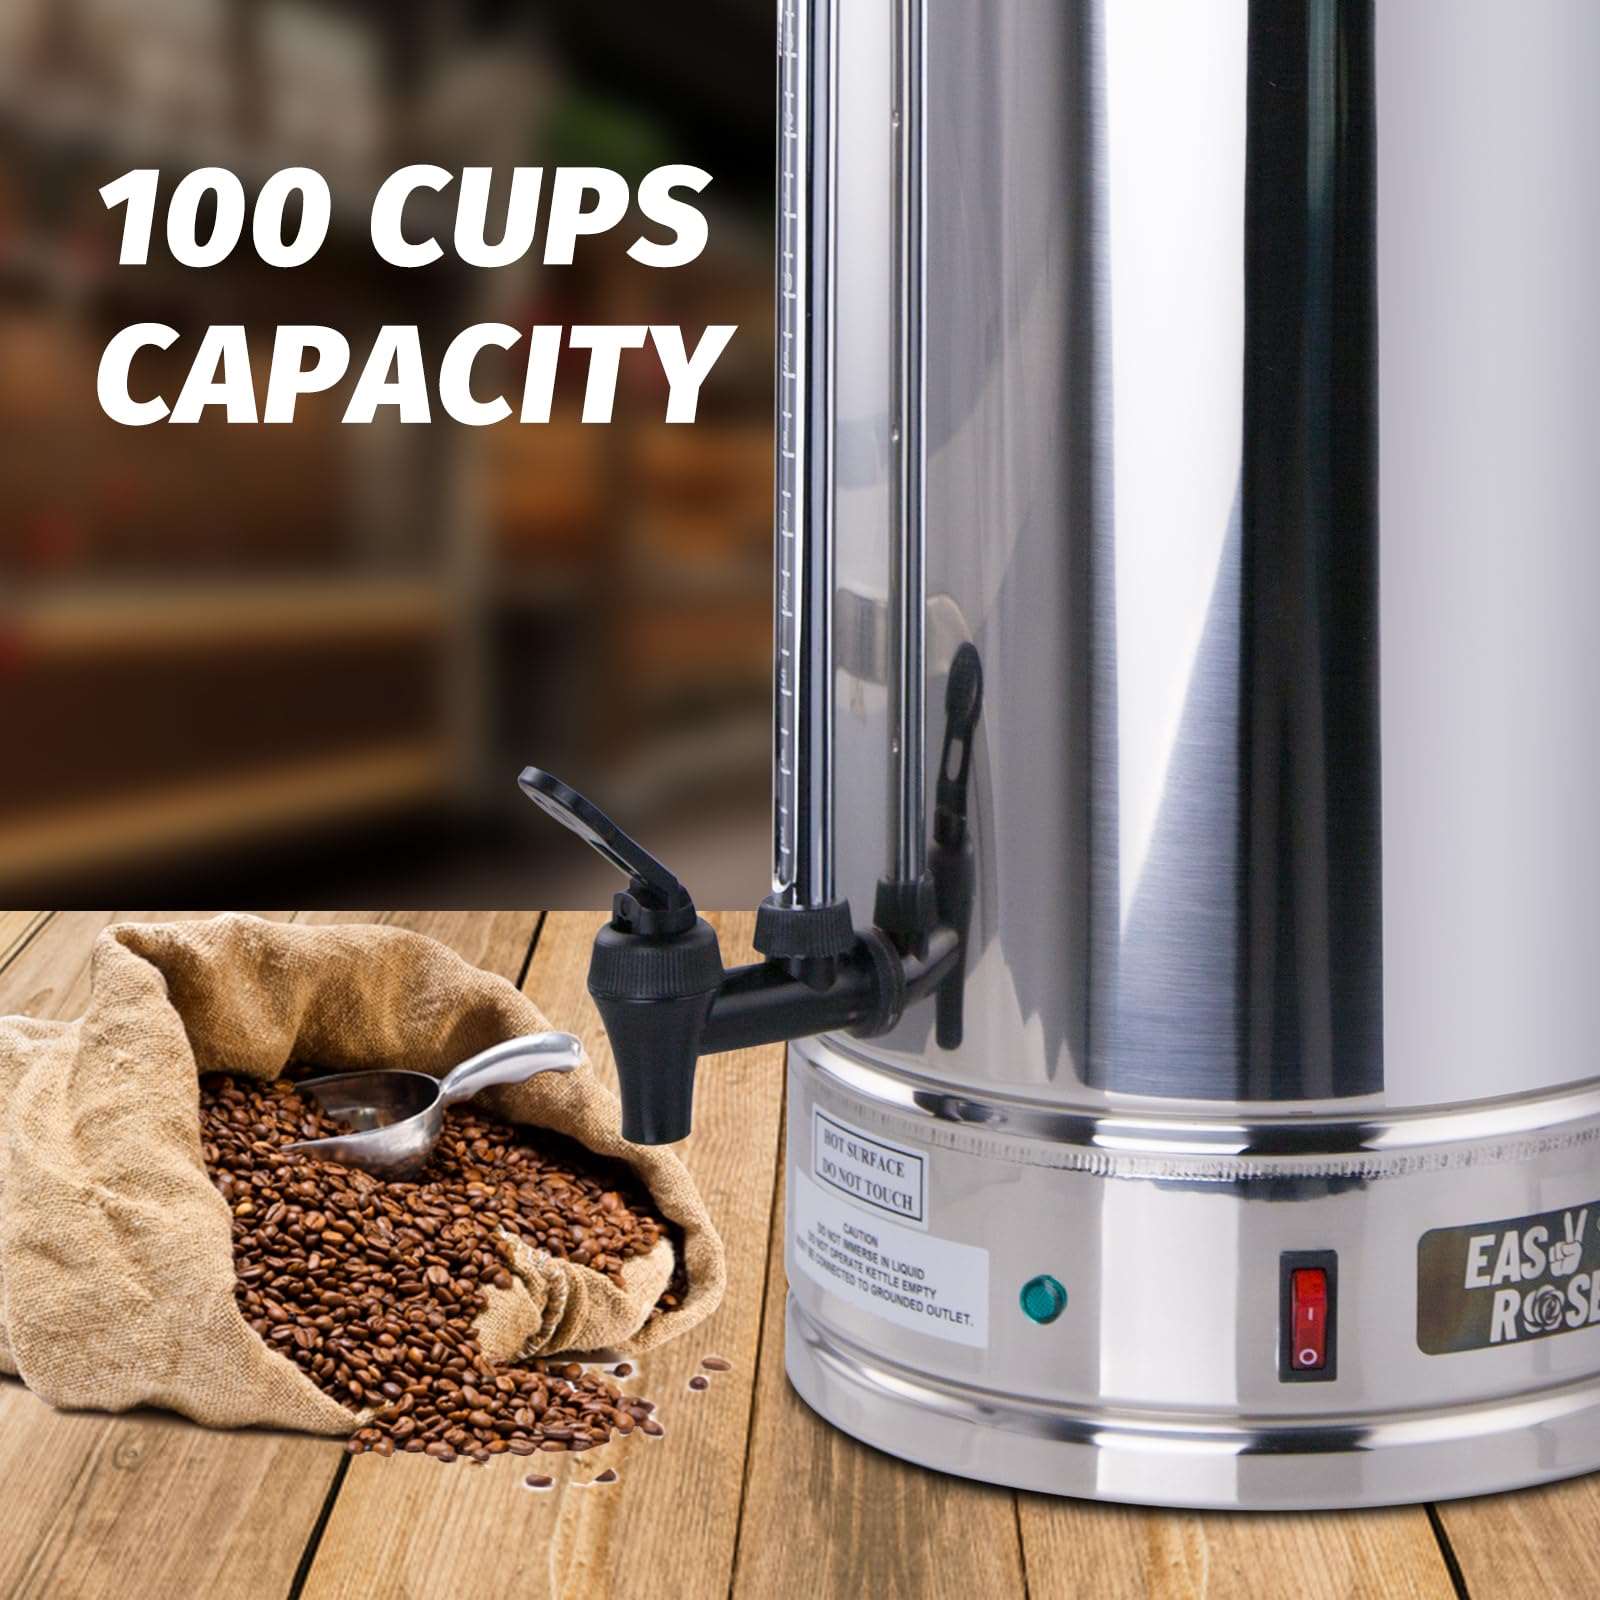 Hakka 20 Cup Coffee Maker One-Touch Brewing Thermal Carafe Maker Stainless  Steel